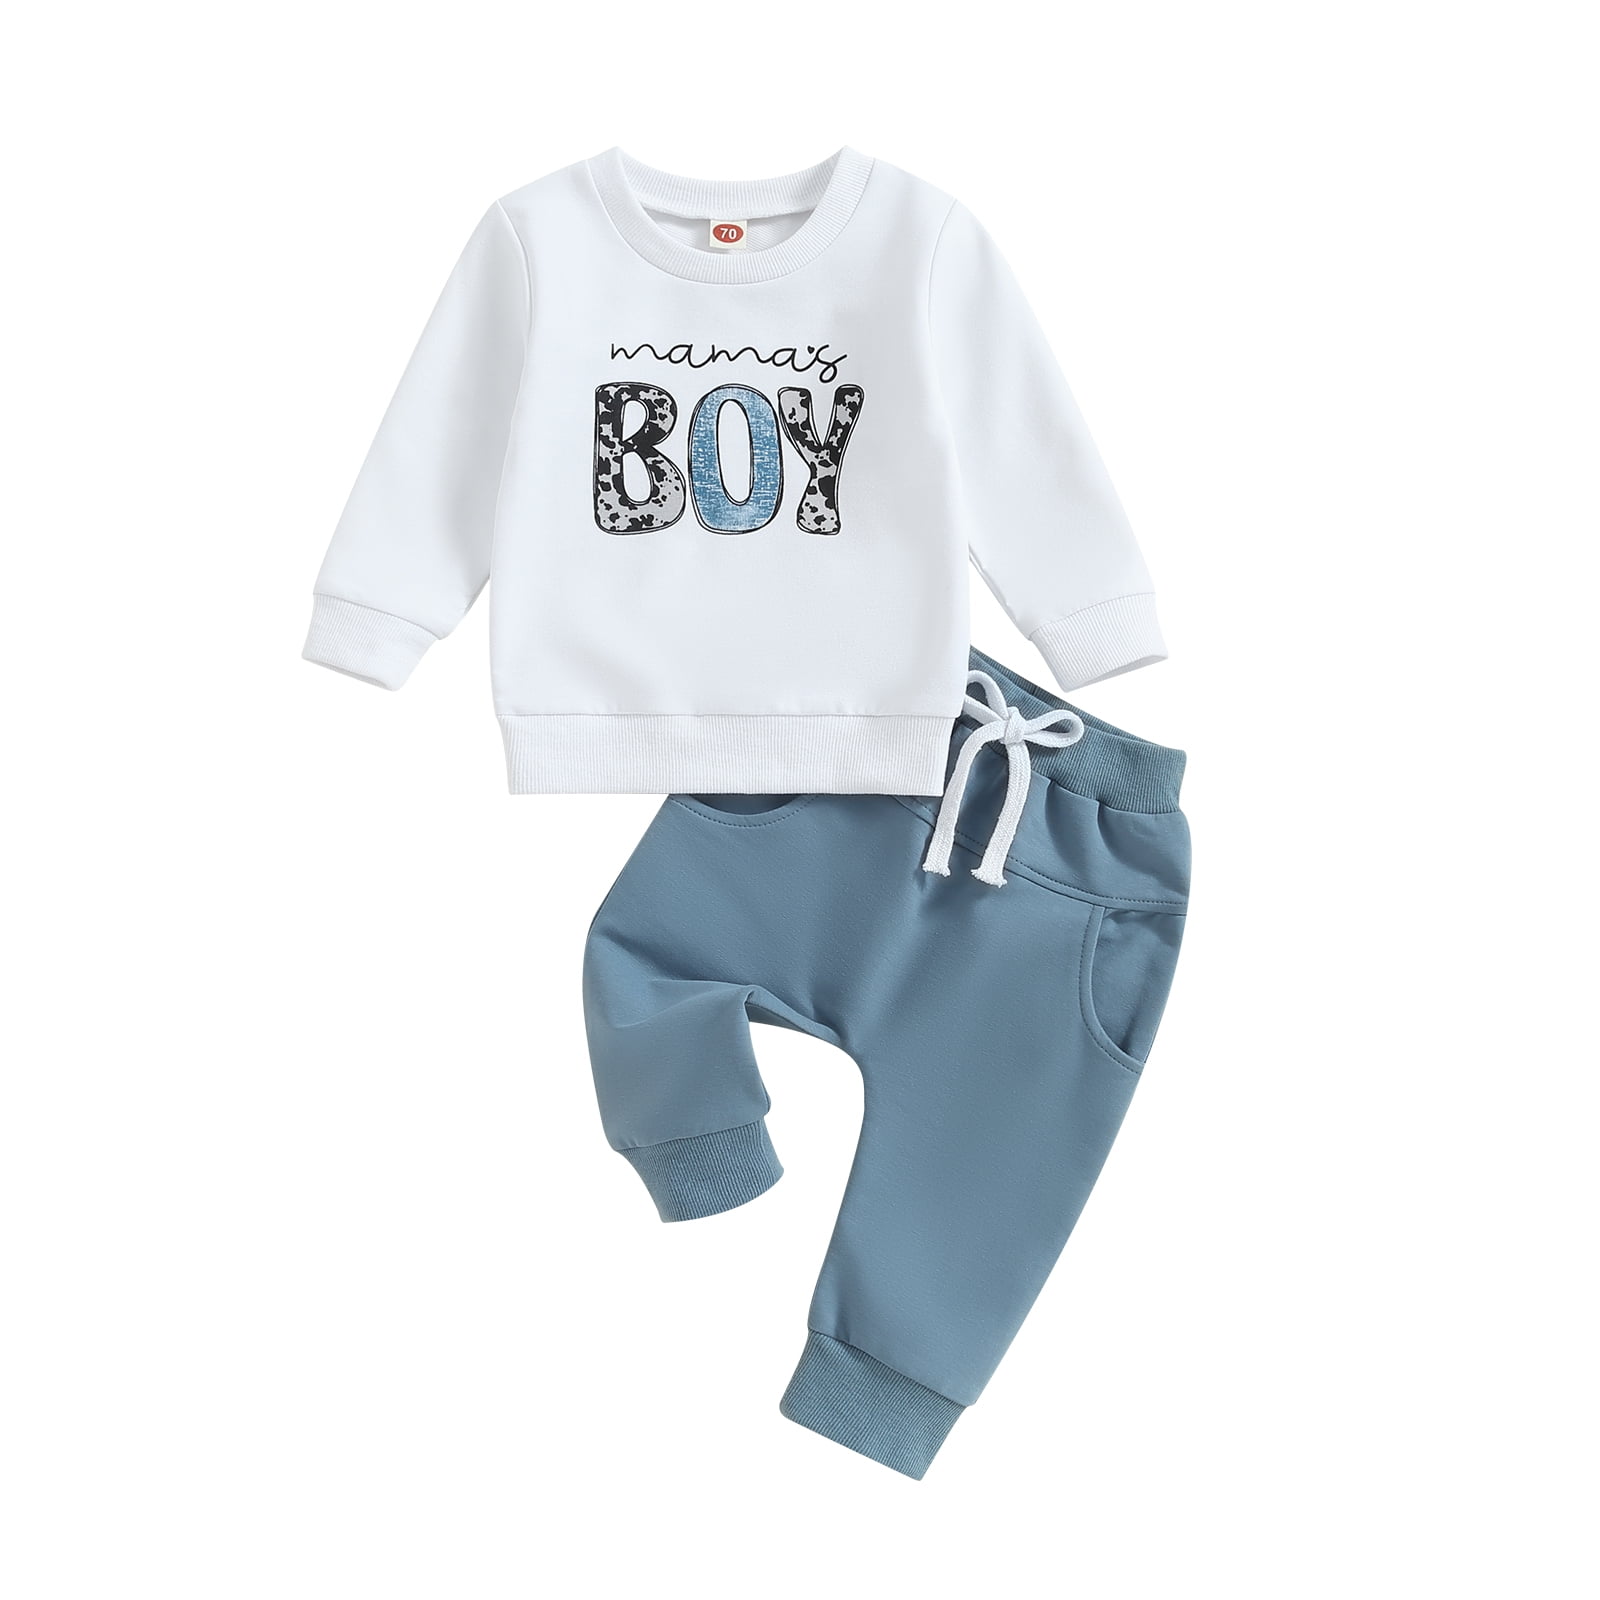 Toddler Baby Boy Clothes Mamas Boy Fall Winter Outfit Long Sleeve ...